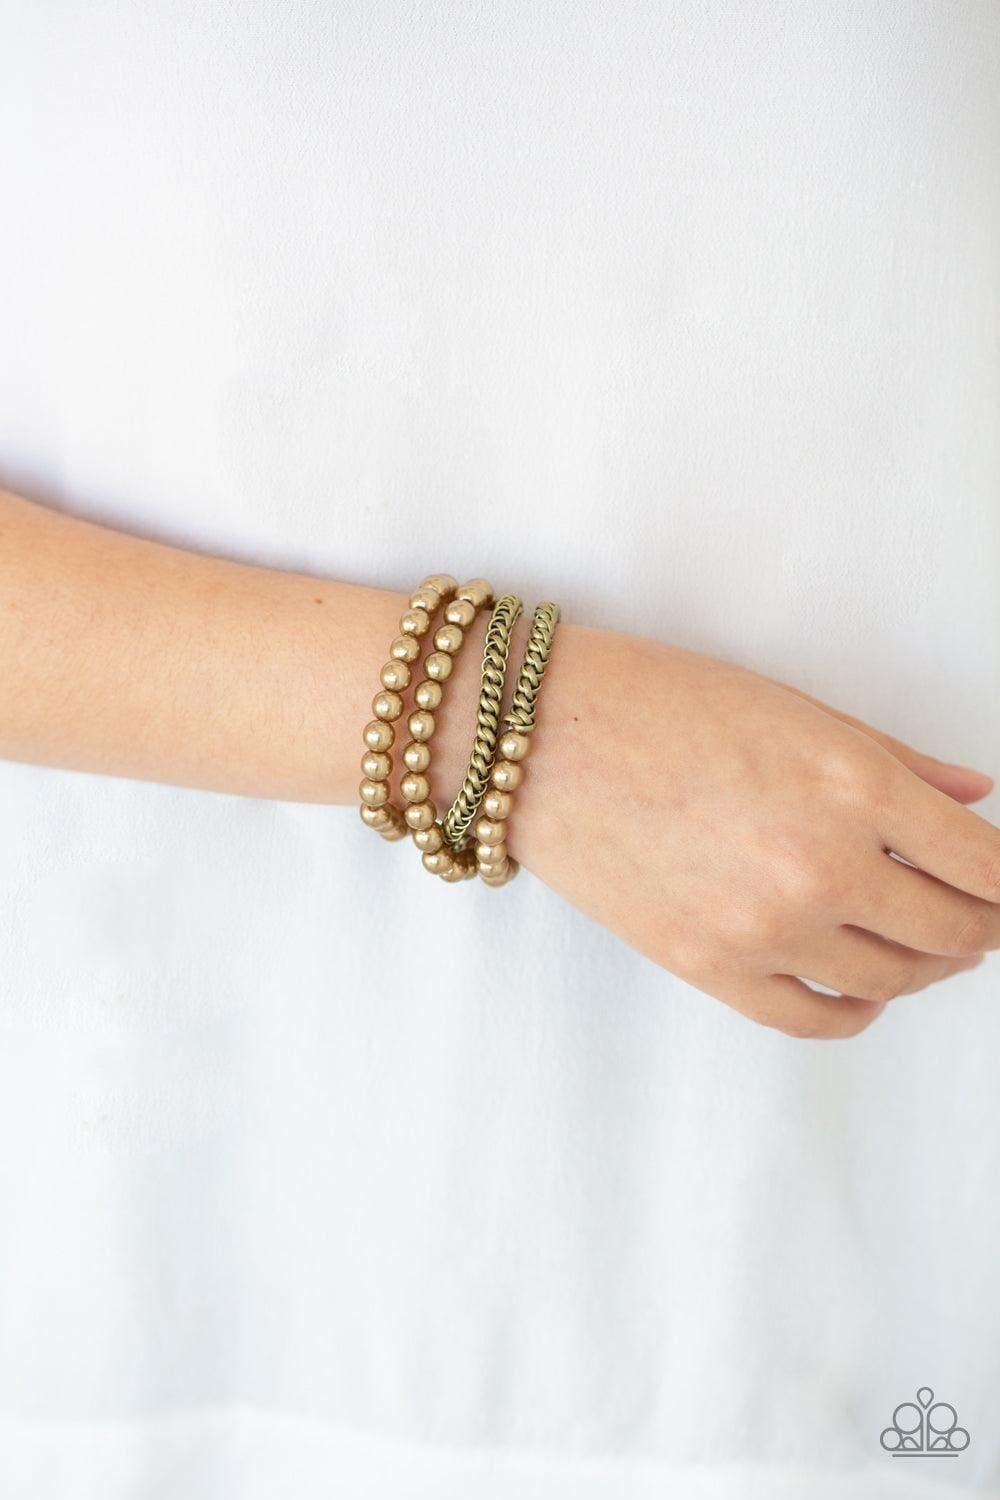 Paparazzi Accessories - Industrial Incognito - Brass Bracelet - Bling by JessieK